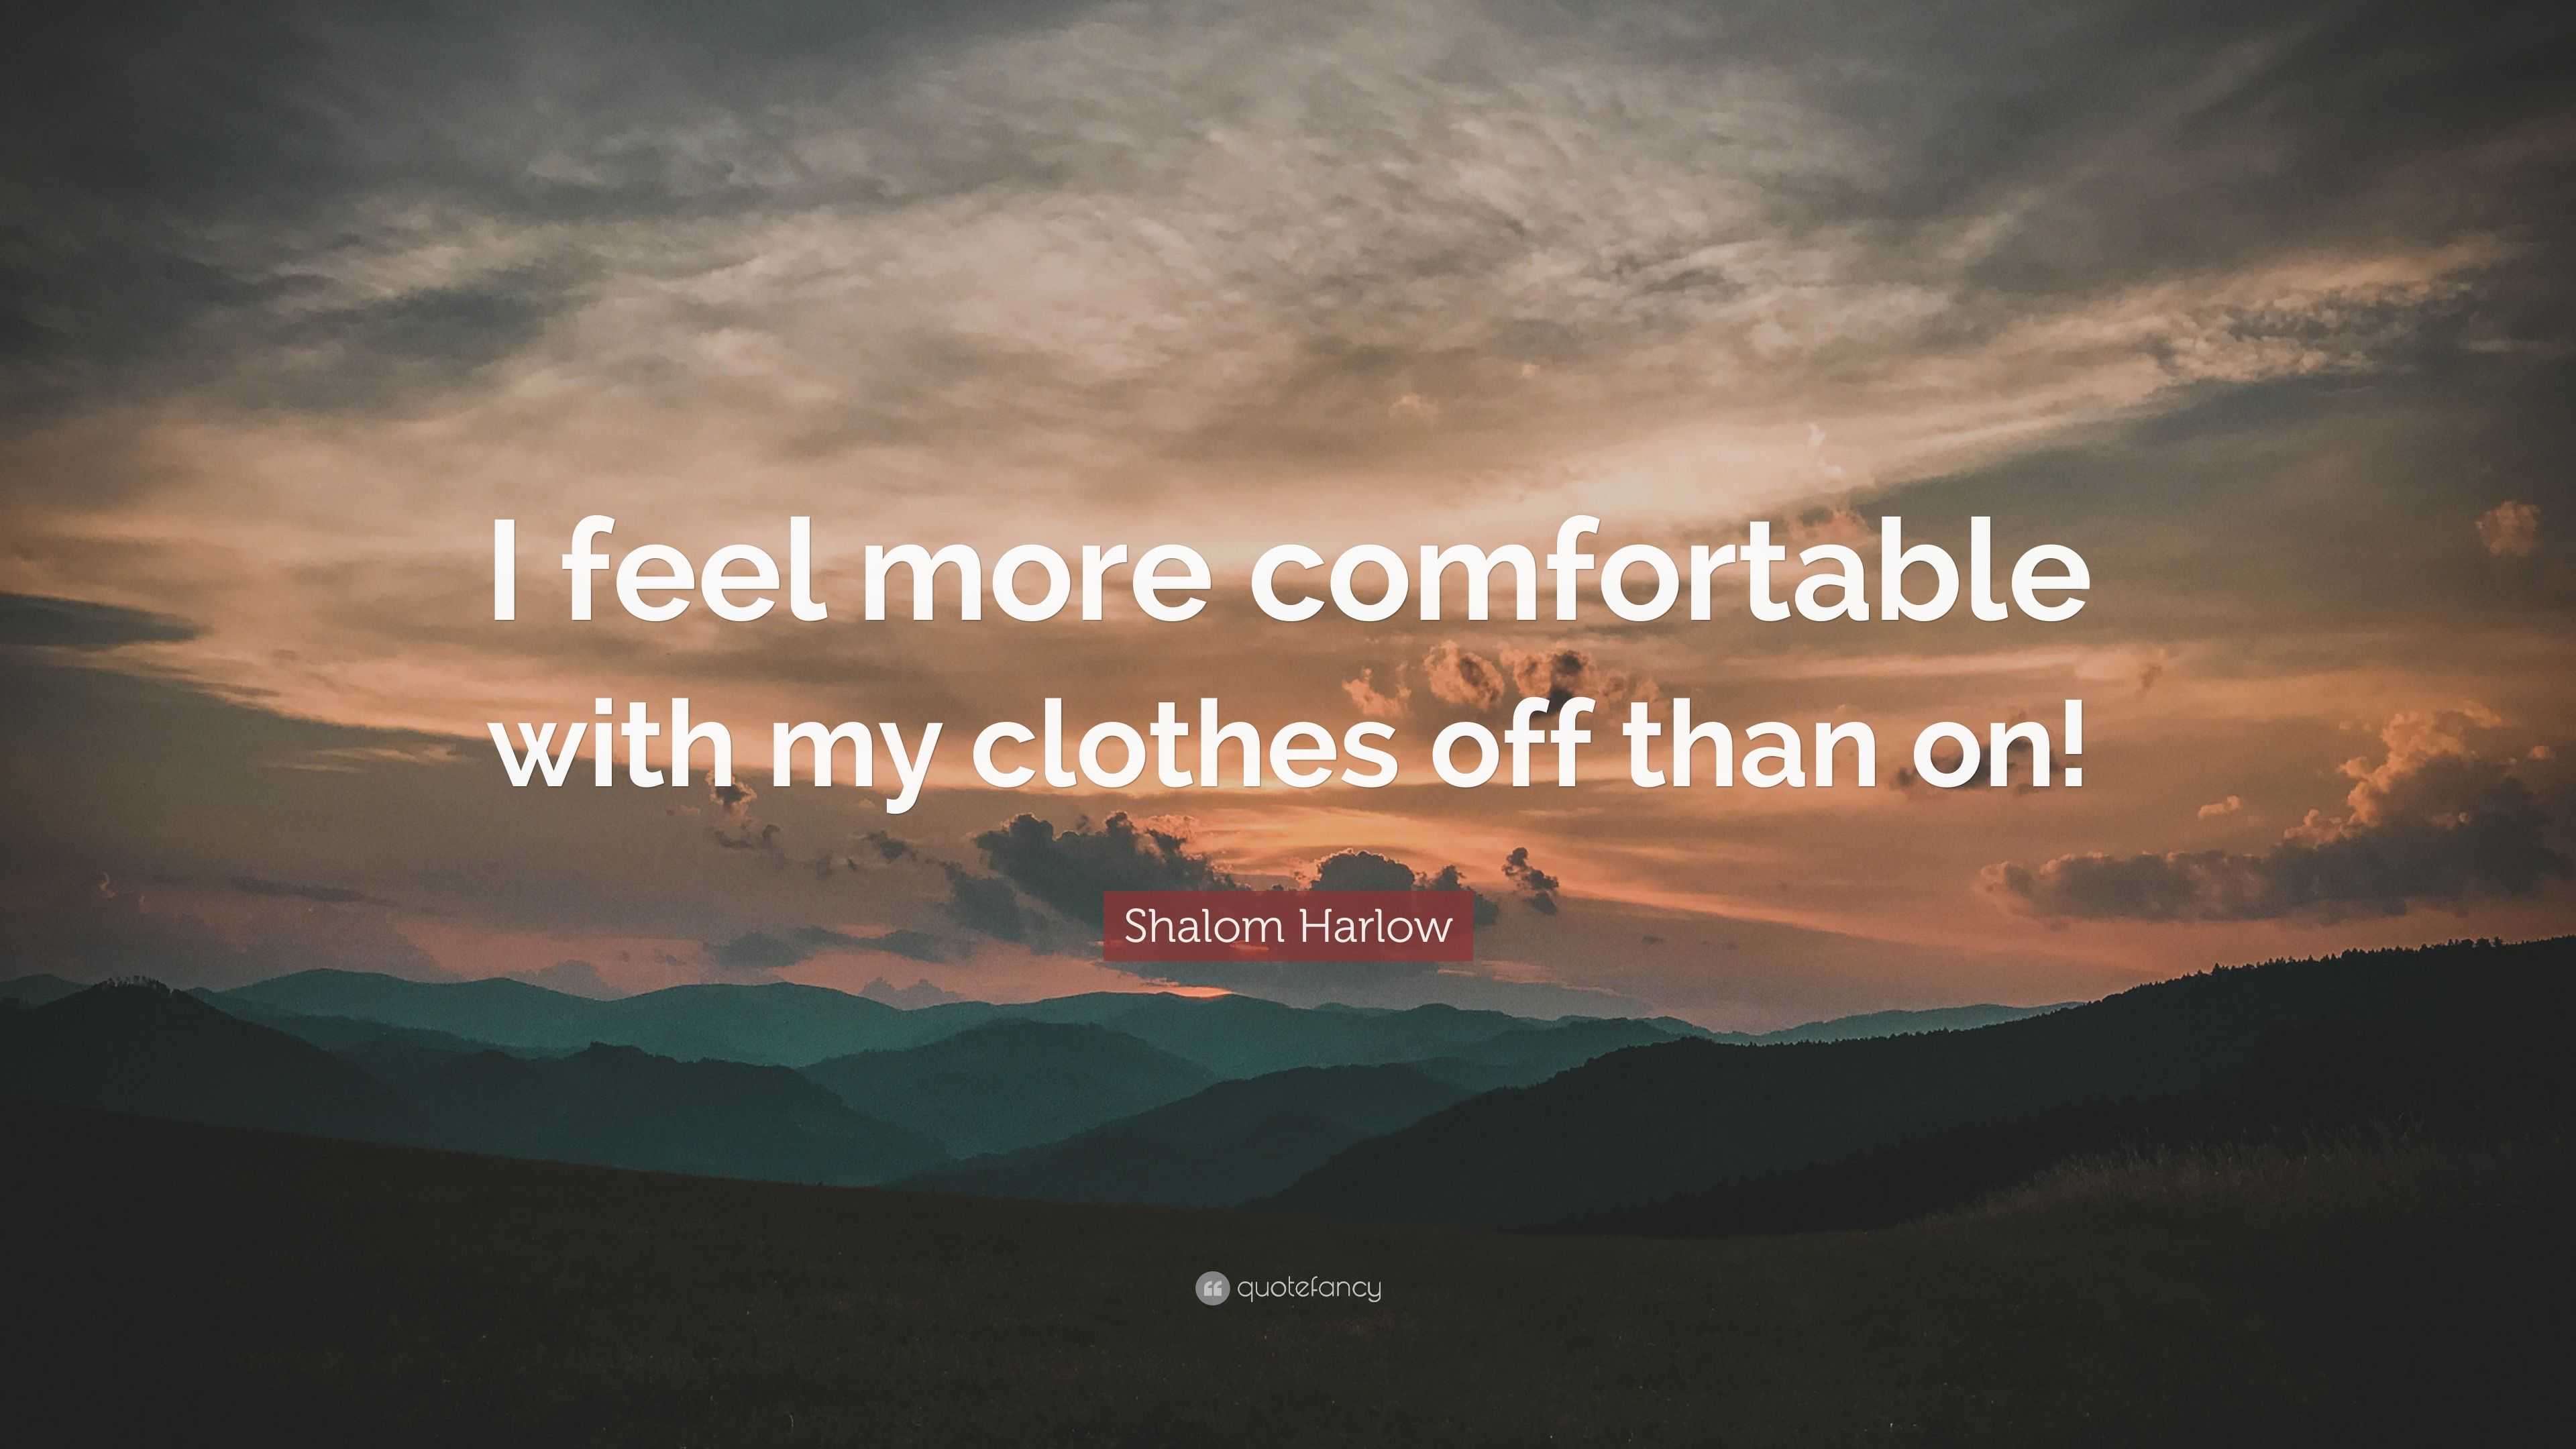 Shalom Harlow Quote: “I feel more comfortable with my clothes off than on!”